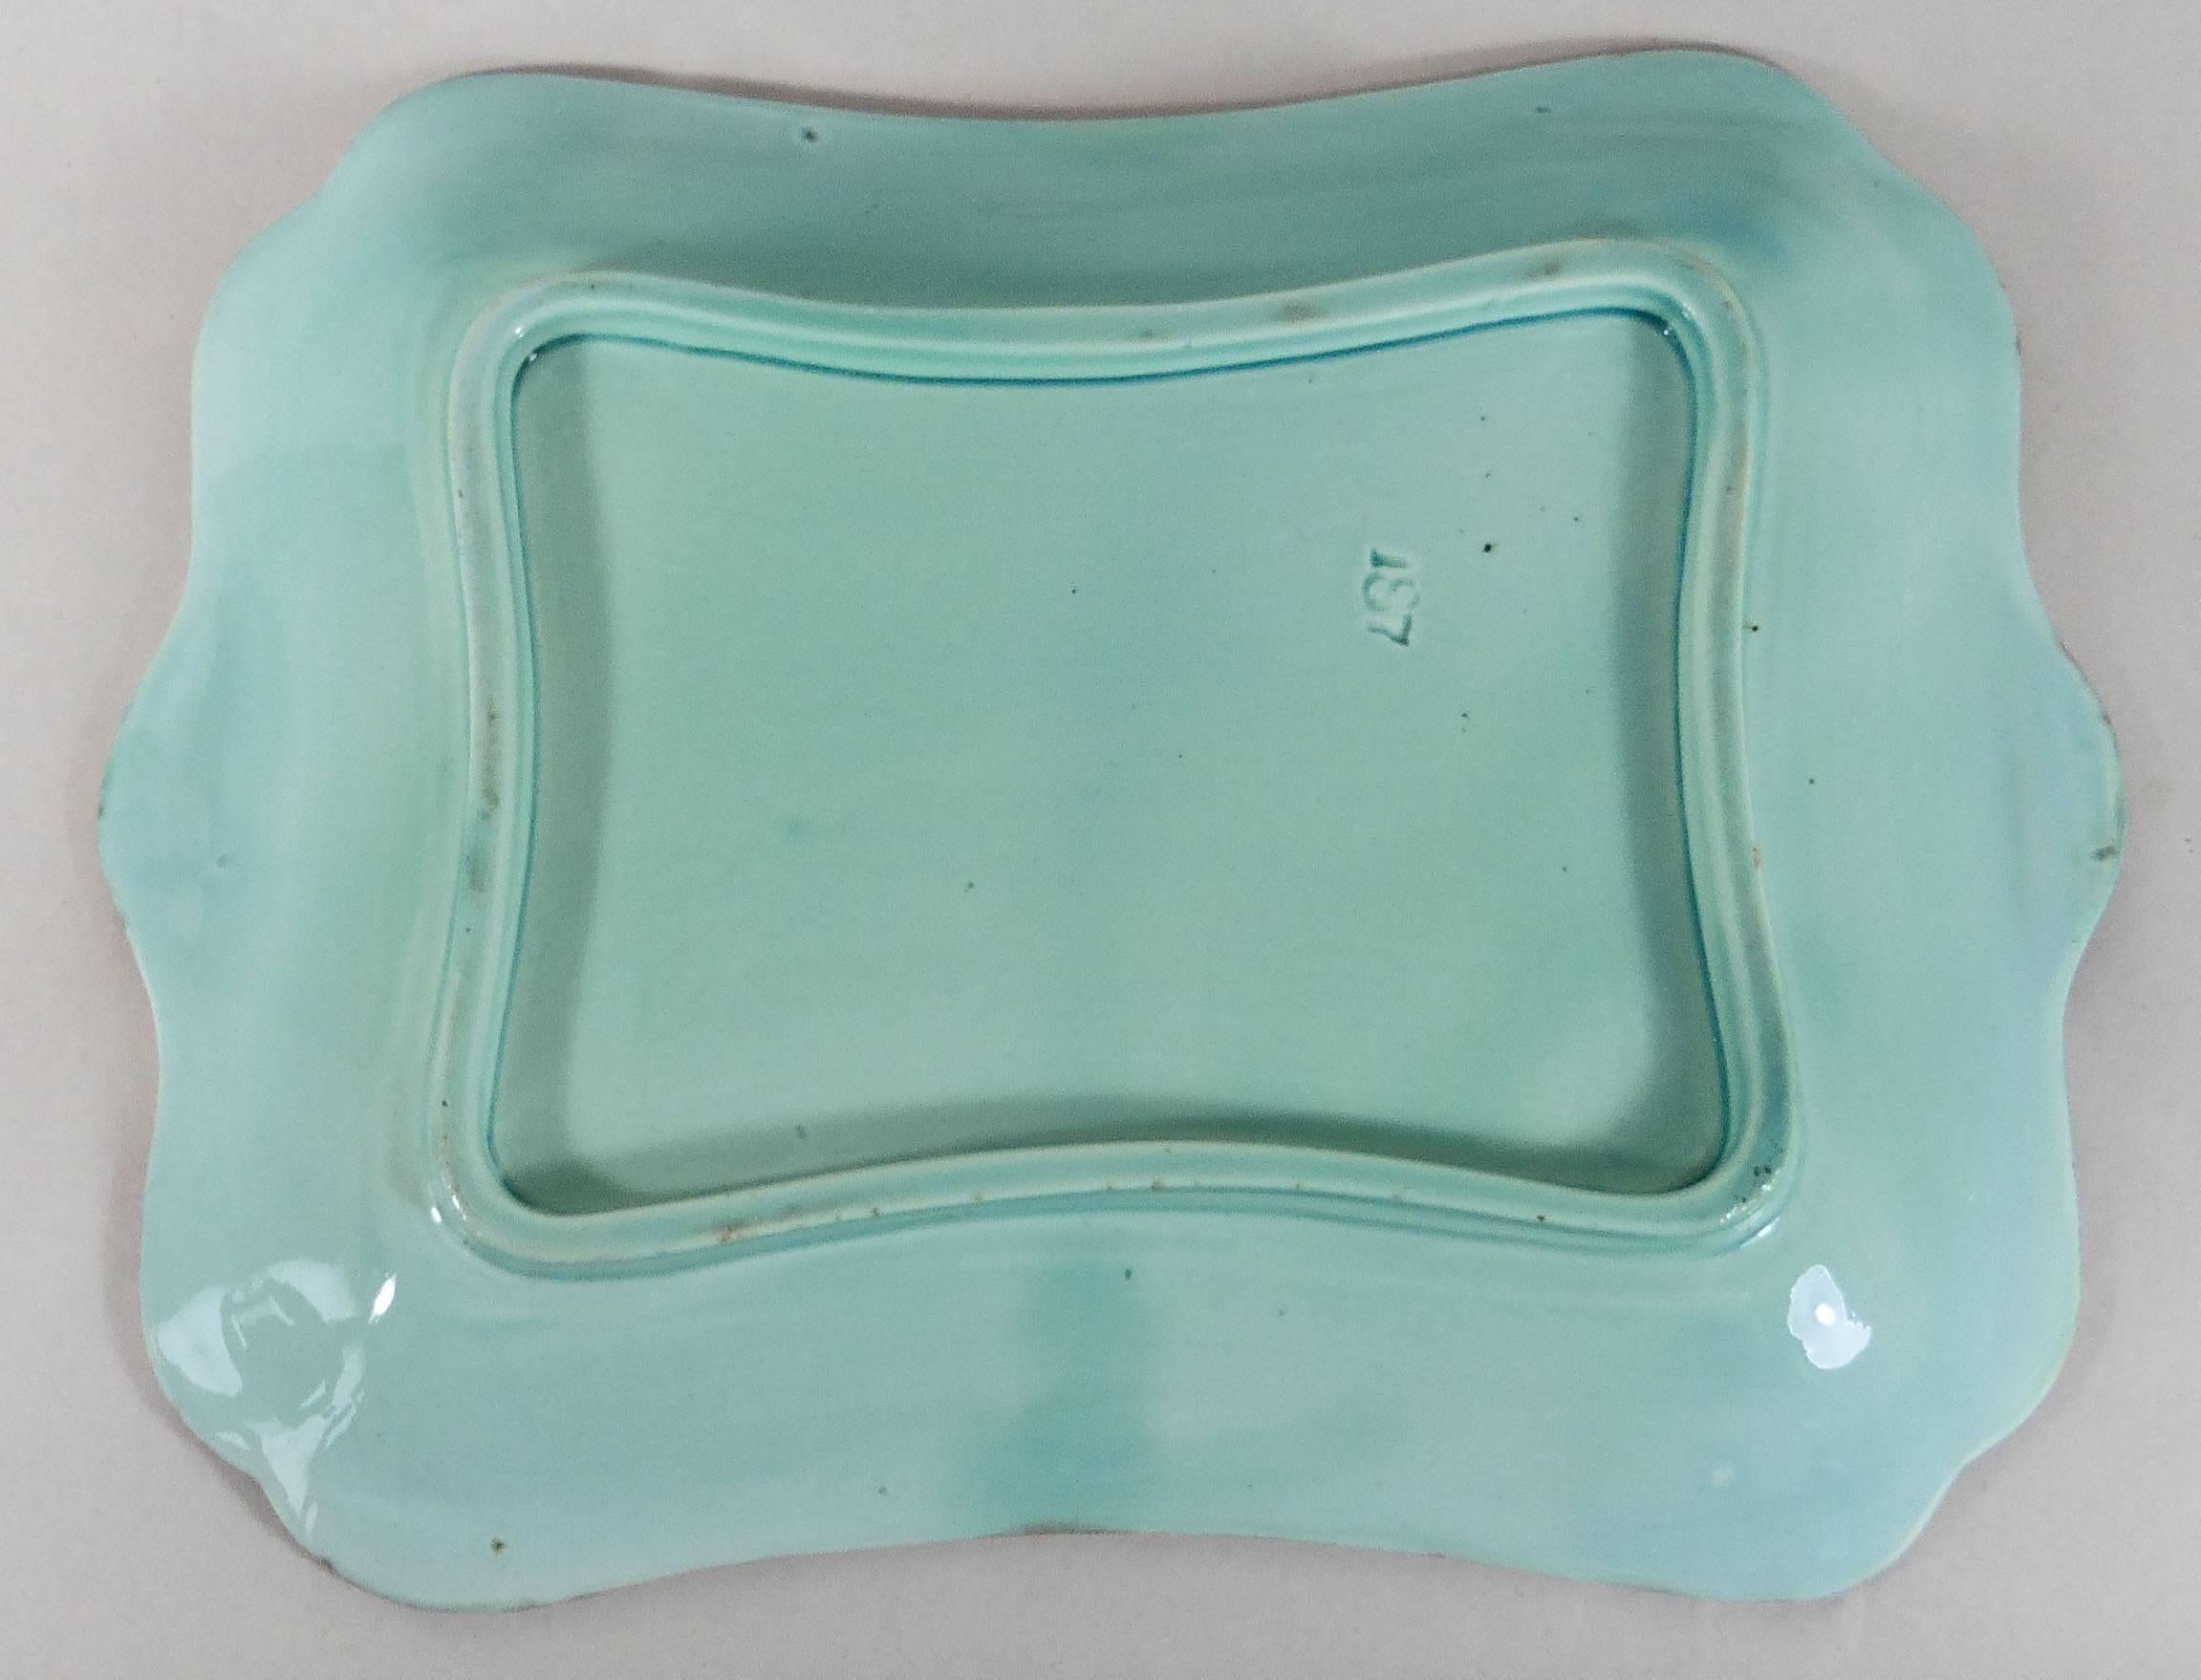 Colorful German turquoise platter decorated with chestnut leaves, circa 1900 attributed to Villeroy & Boch.